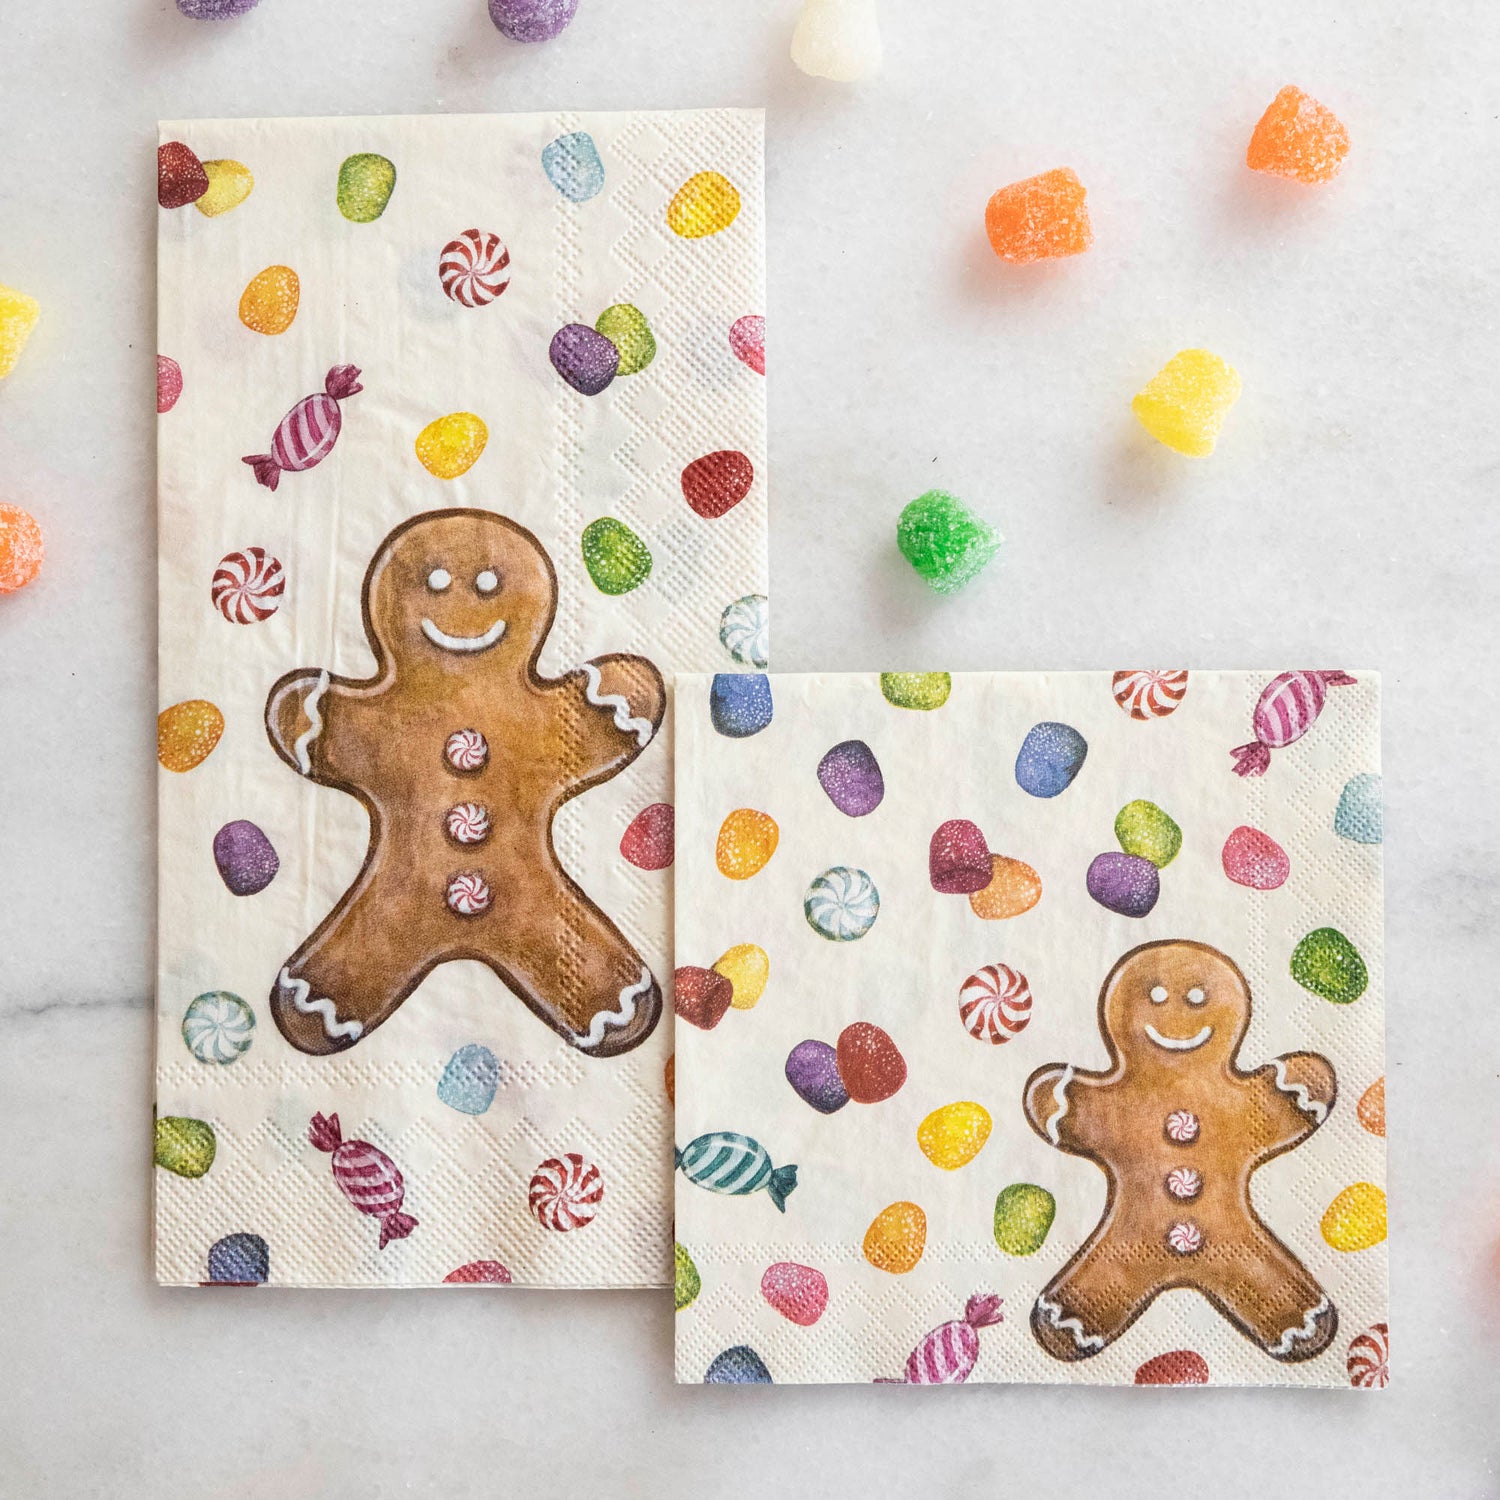 Two Gingerbread Napkins, one Guest and one Cocktail, on a white table surrounded by gumdrops.